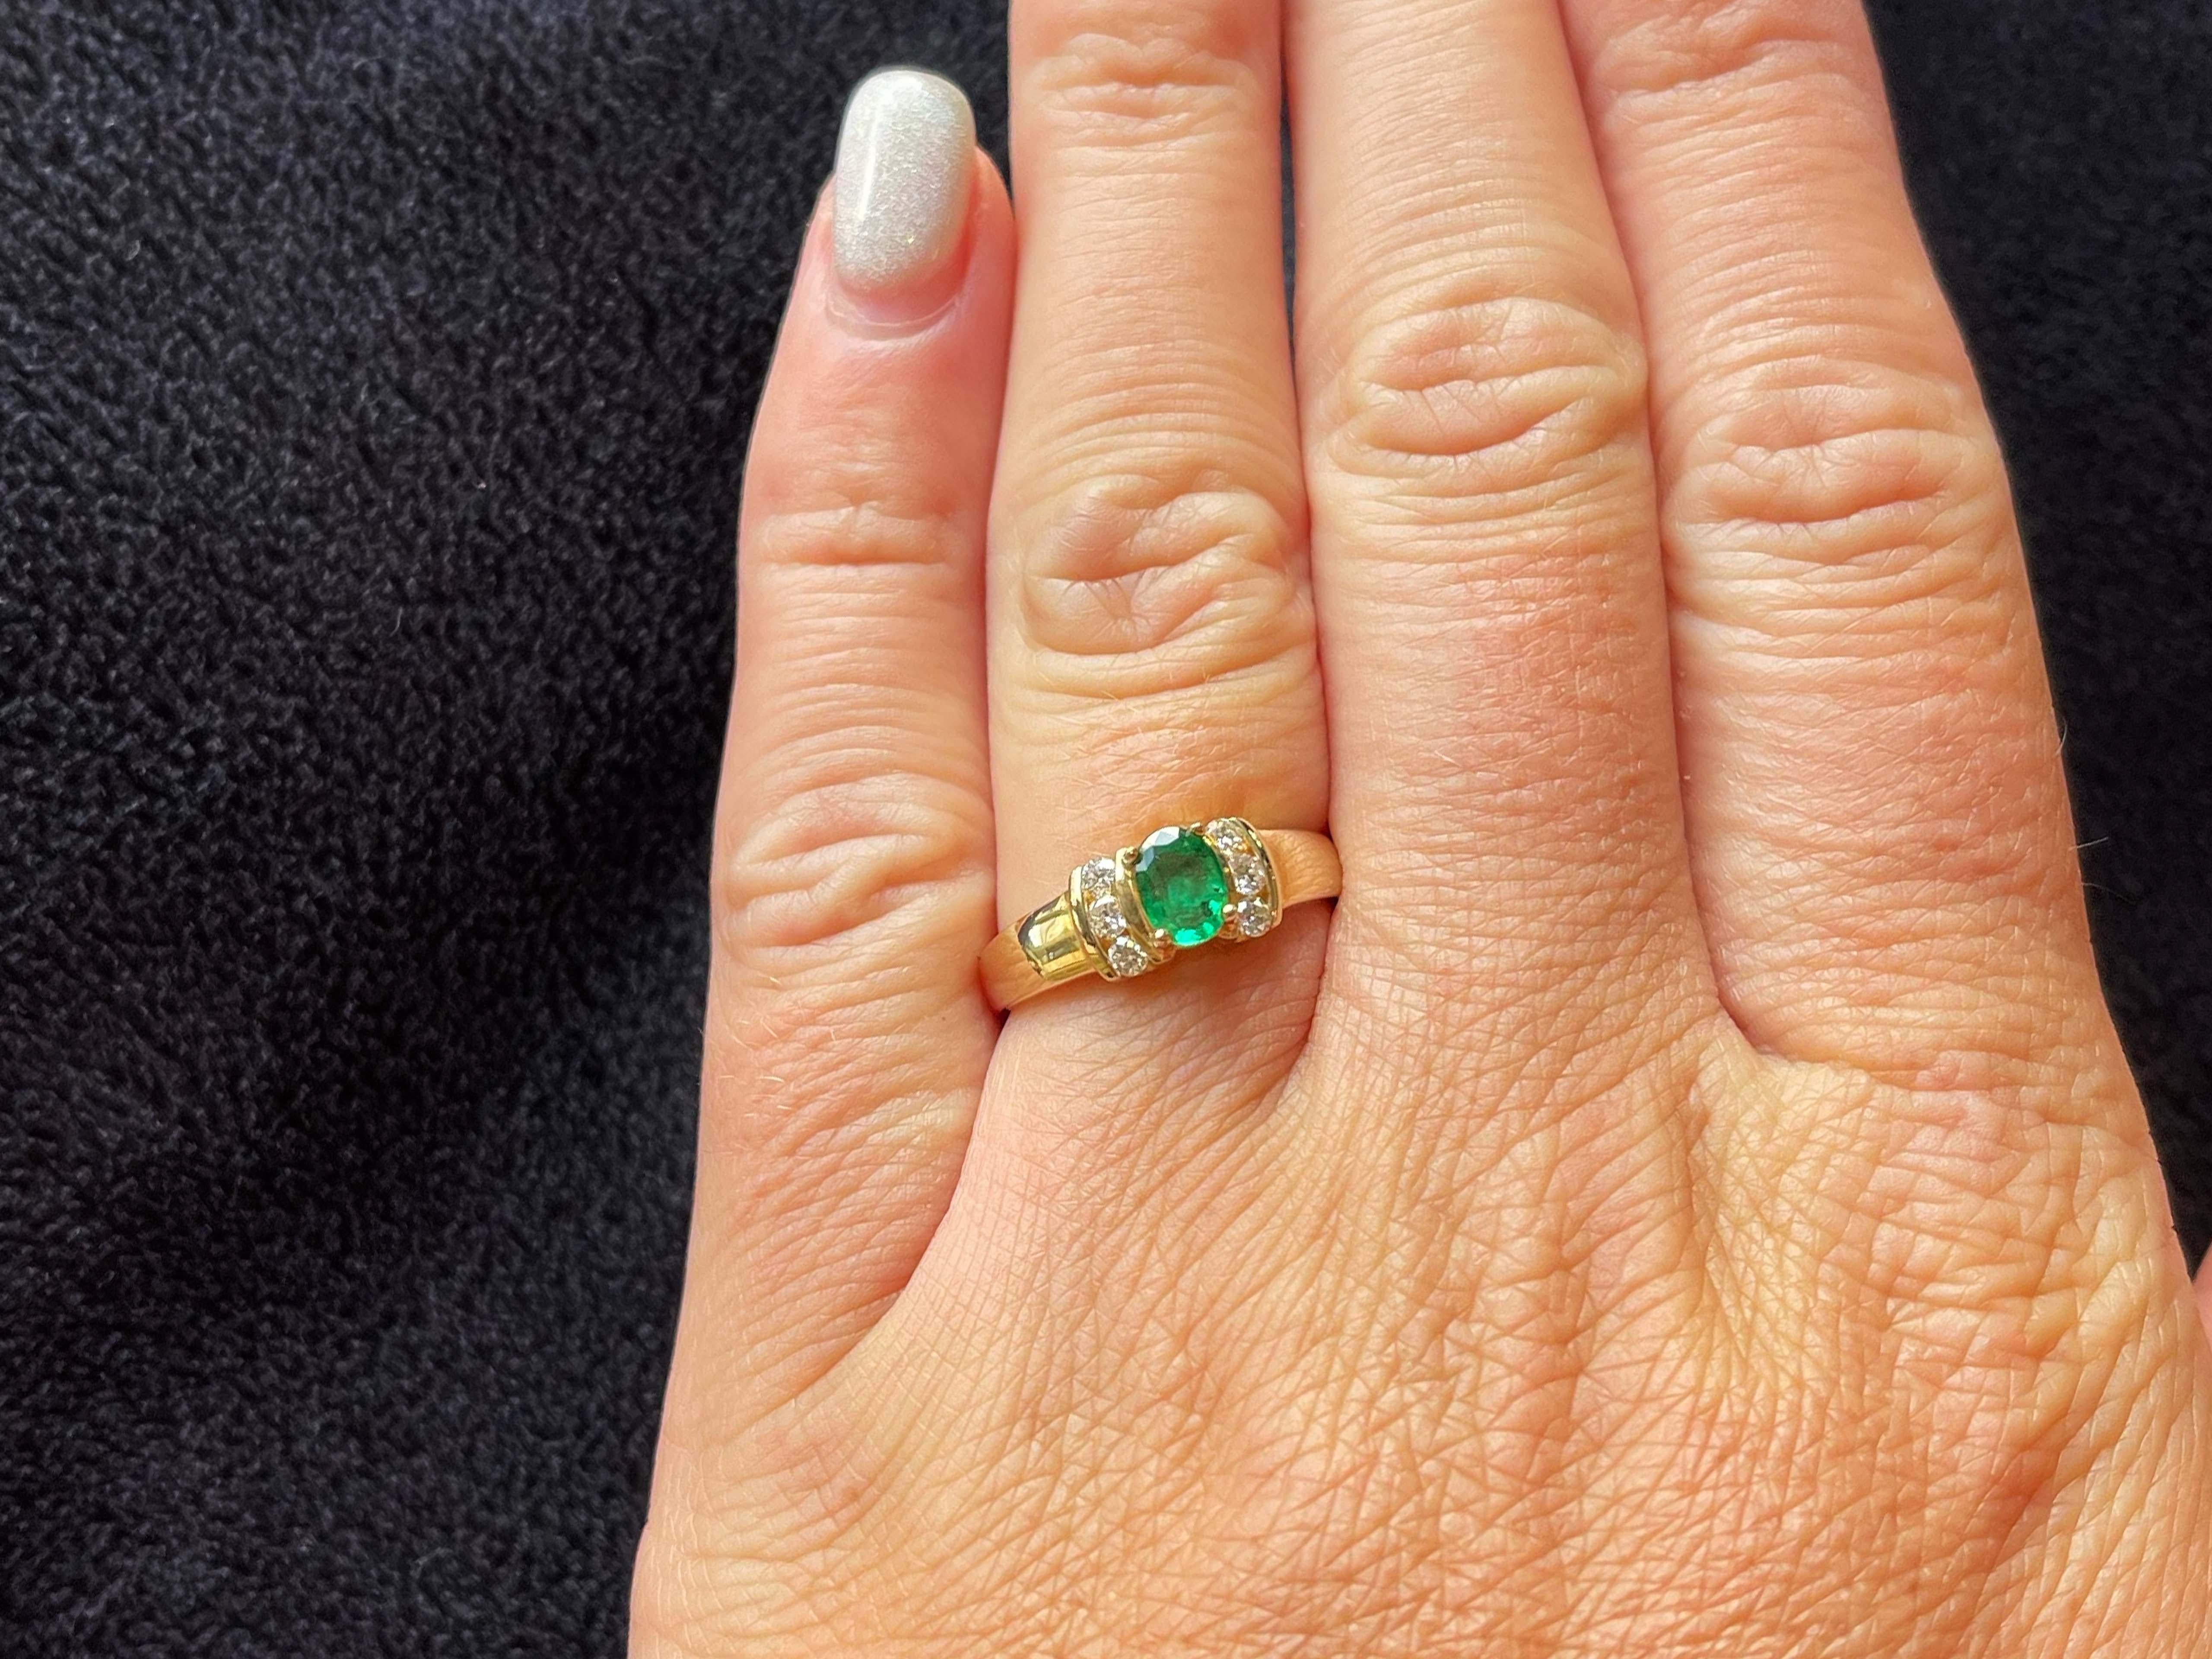 Item Specifications:

Metal: 14k Yellow Gold

Style: Statement Ring

Ring Size: 6.25 (resizing available for a fee)

Total Weight: 2.2 Grams

Diamond Count: 6

Diamond Carat Weight: 0.12

Diamond Color: G-H

Diamond Clarity: SI1-SI2

Gemstone